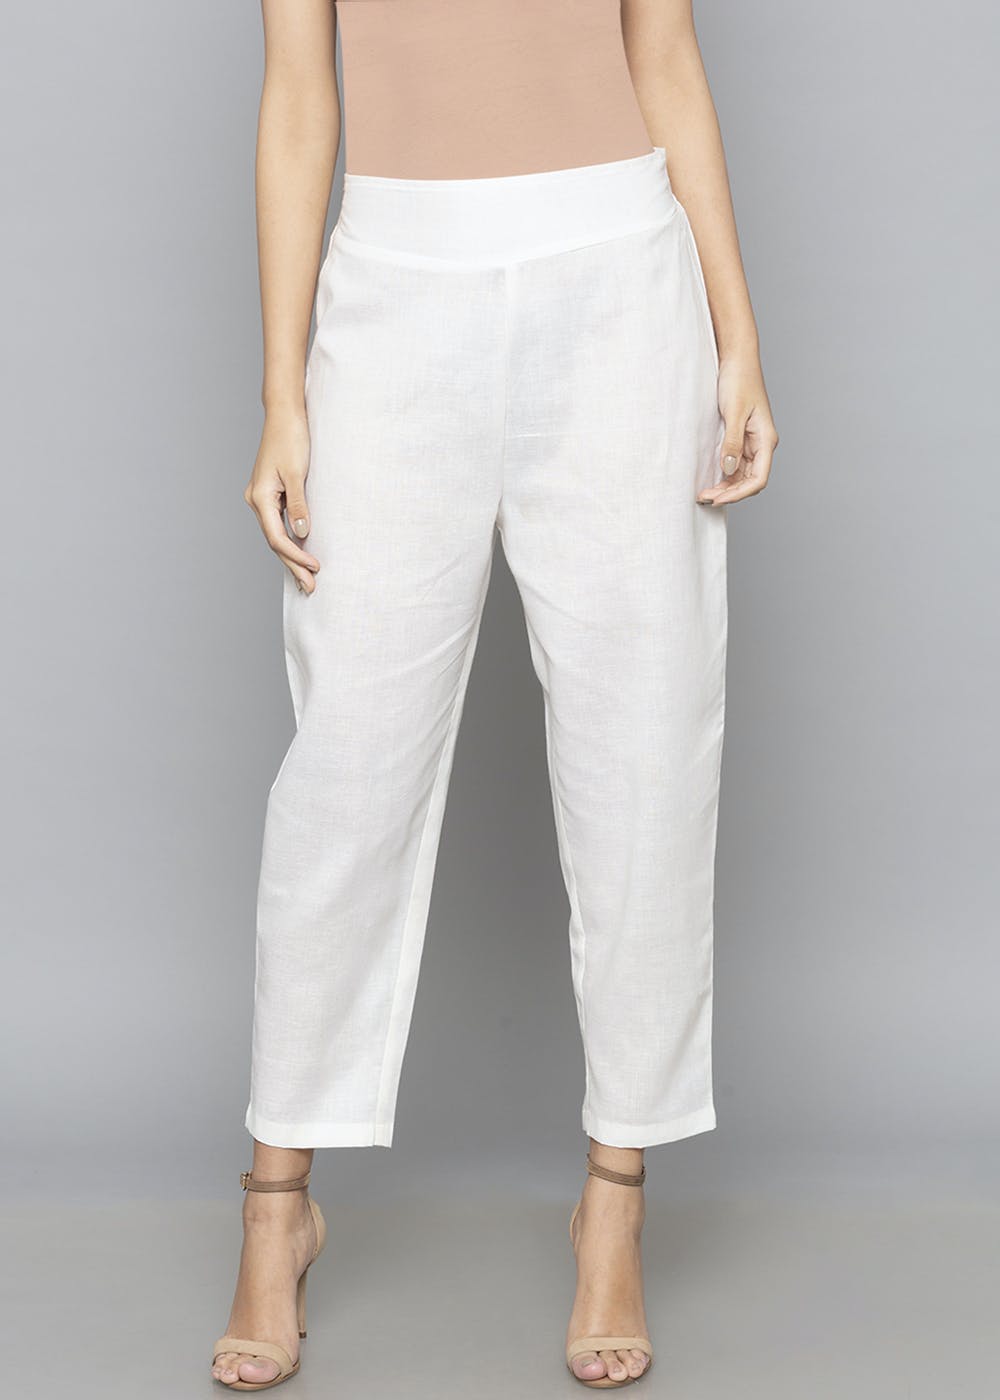 Our Cotton Relax Ankle Pants are your... - Uniqlo Philippines | Facebook